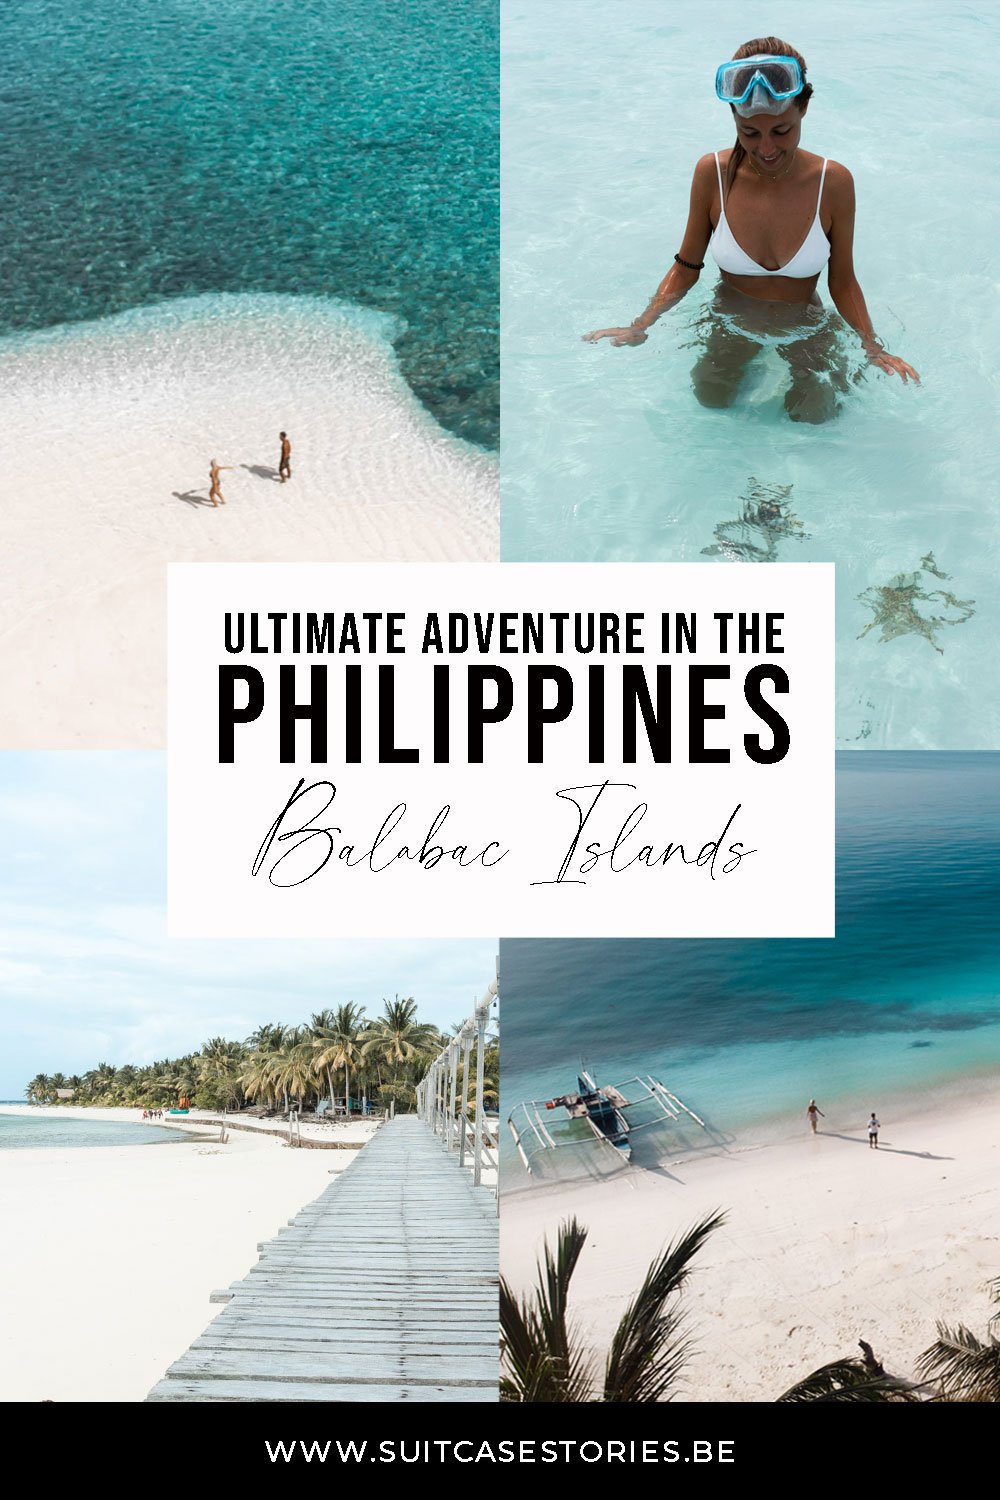 Balabac Palawan: the ultimate adventure in the Philippines